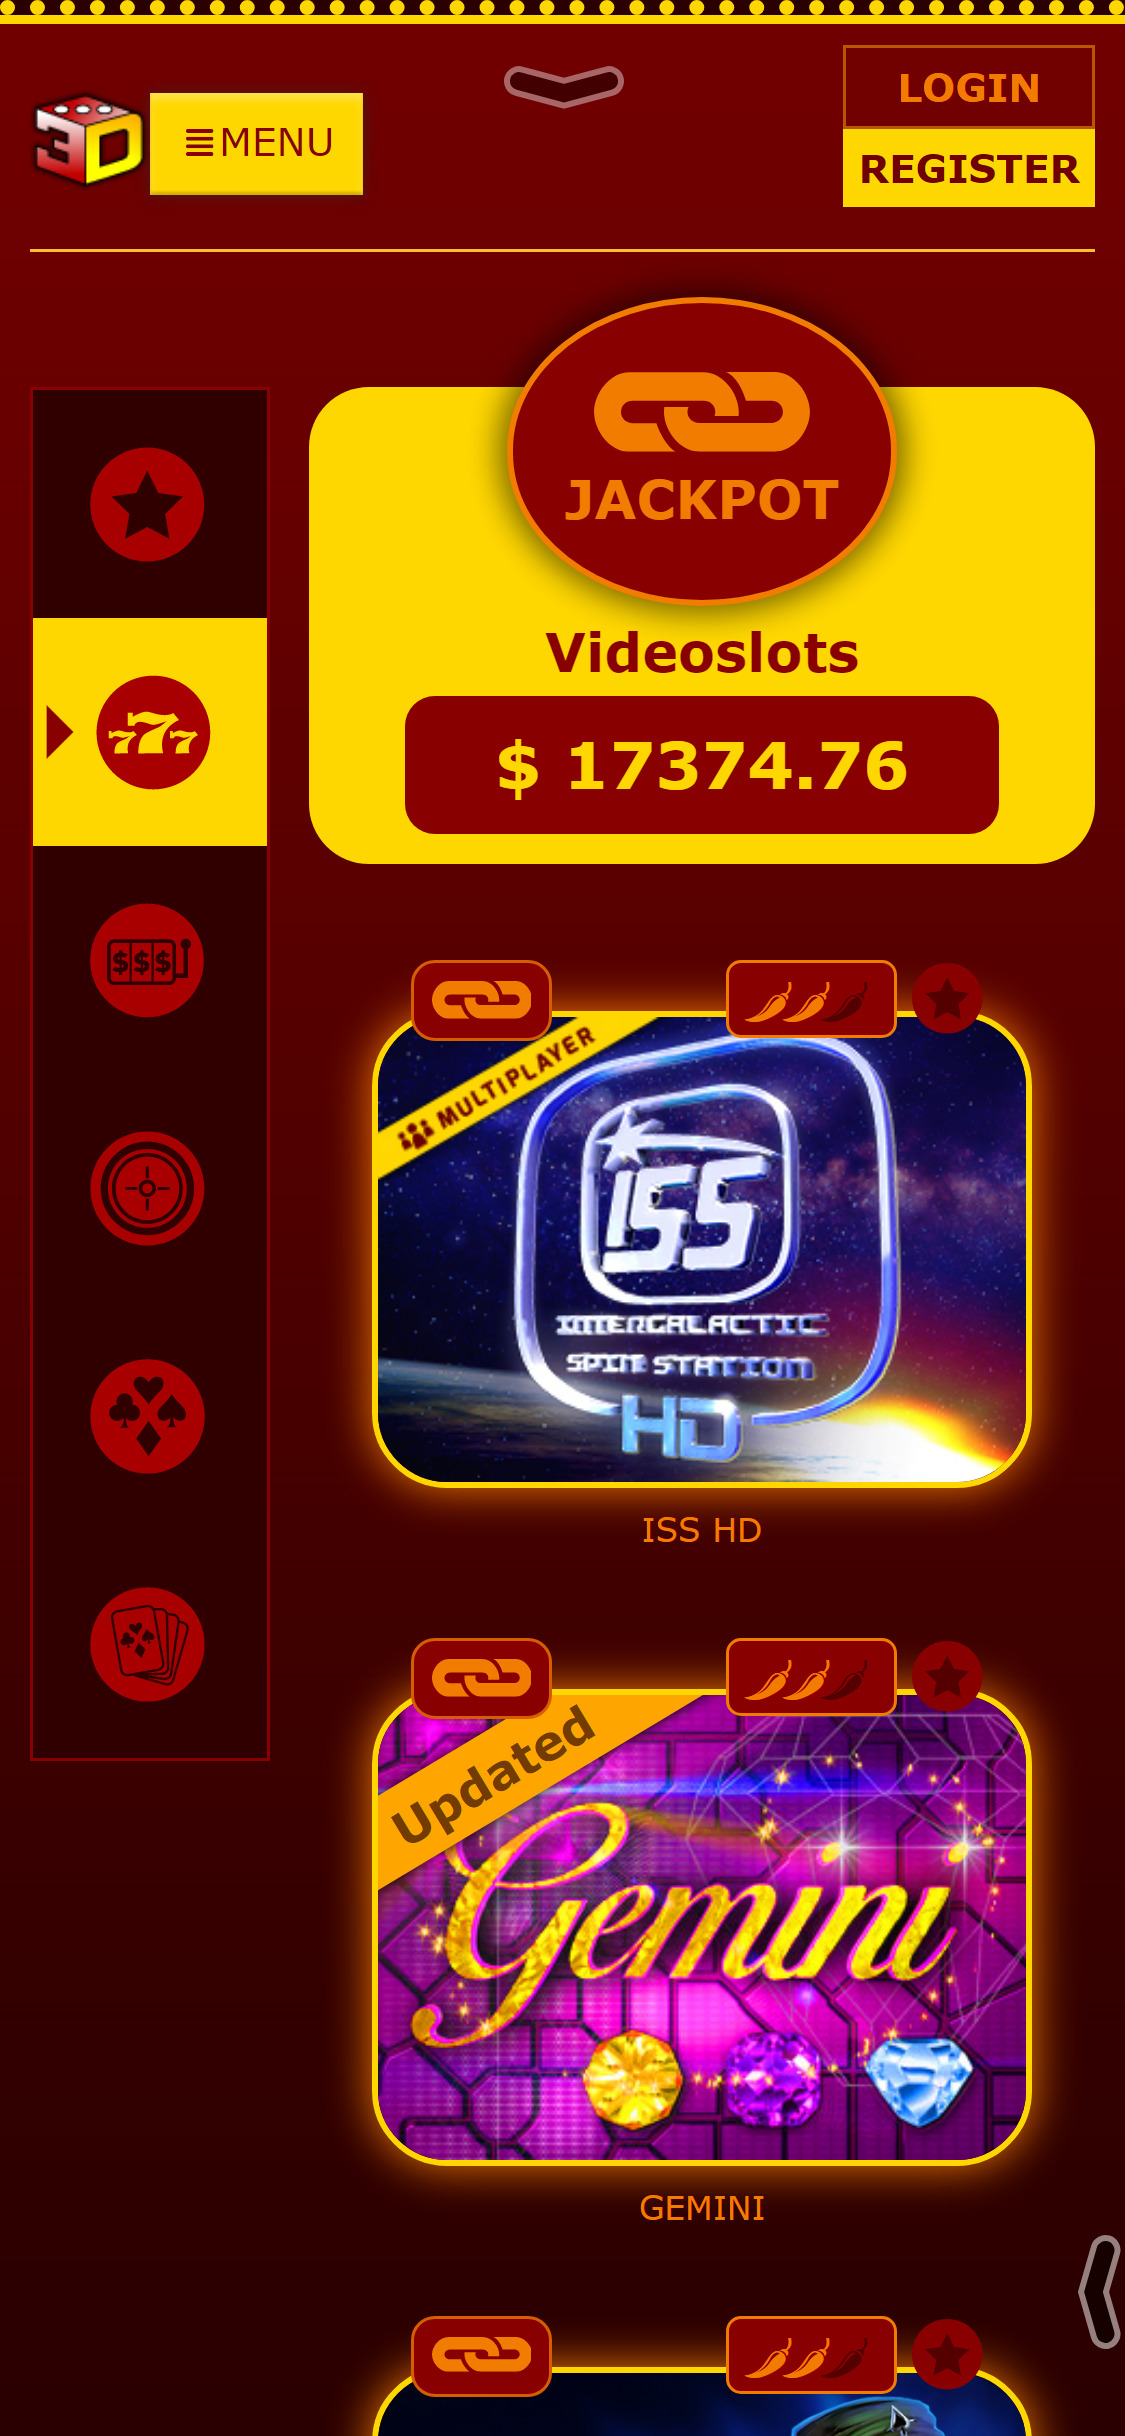 3 Dice Casino Mobile Games Review